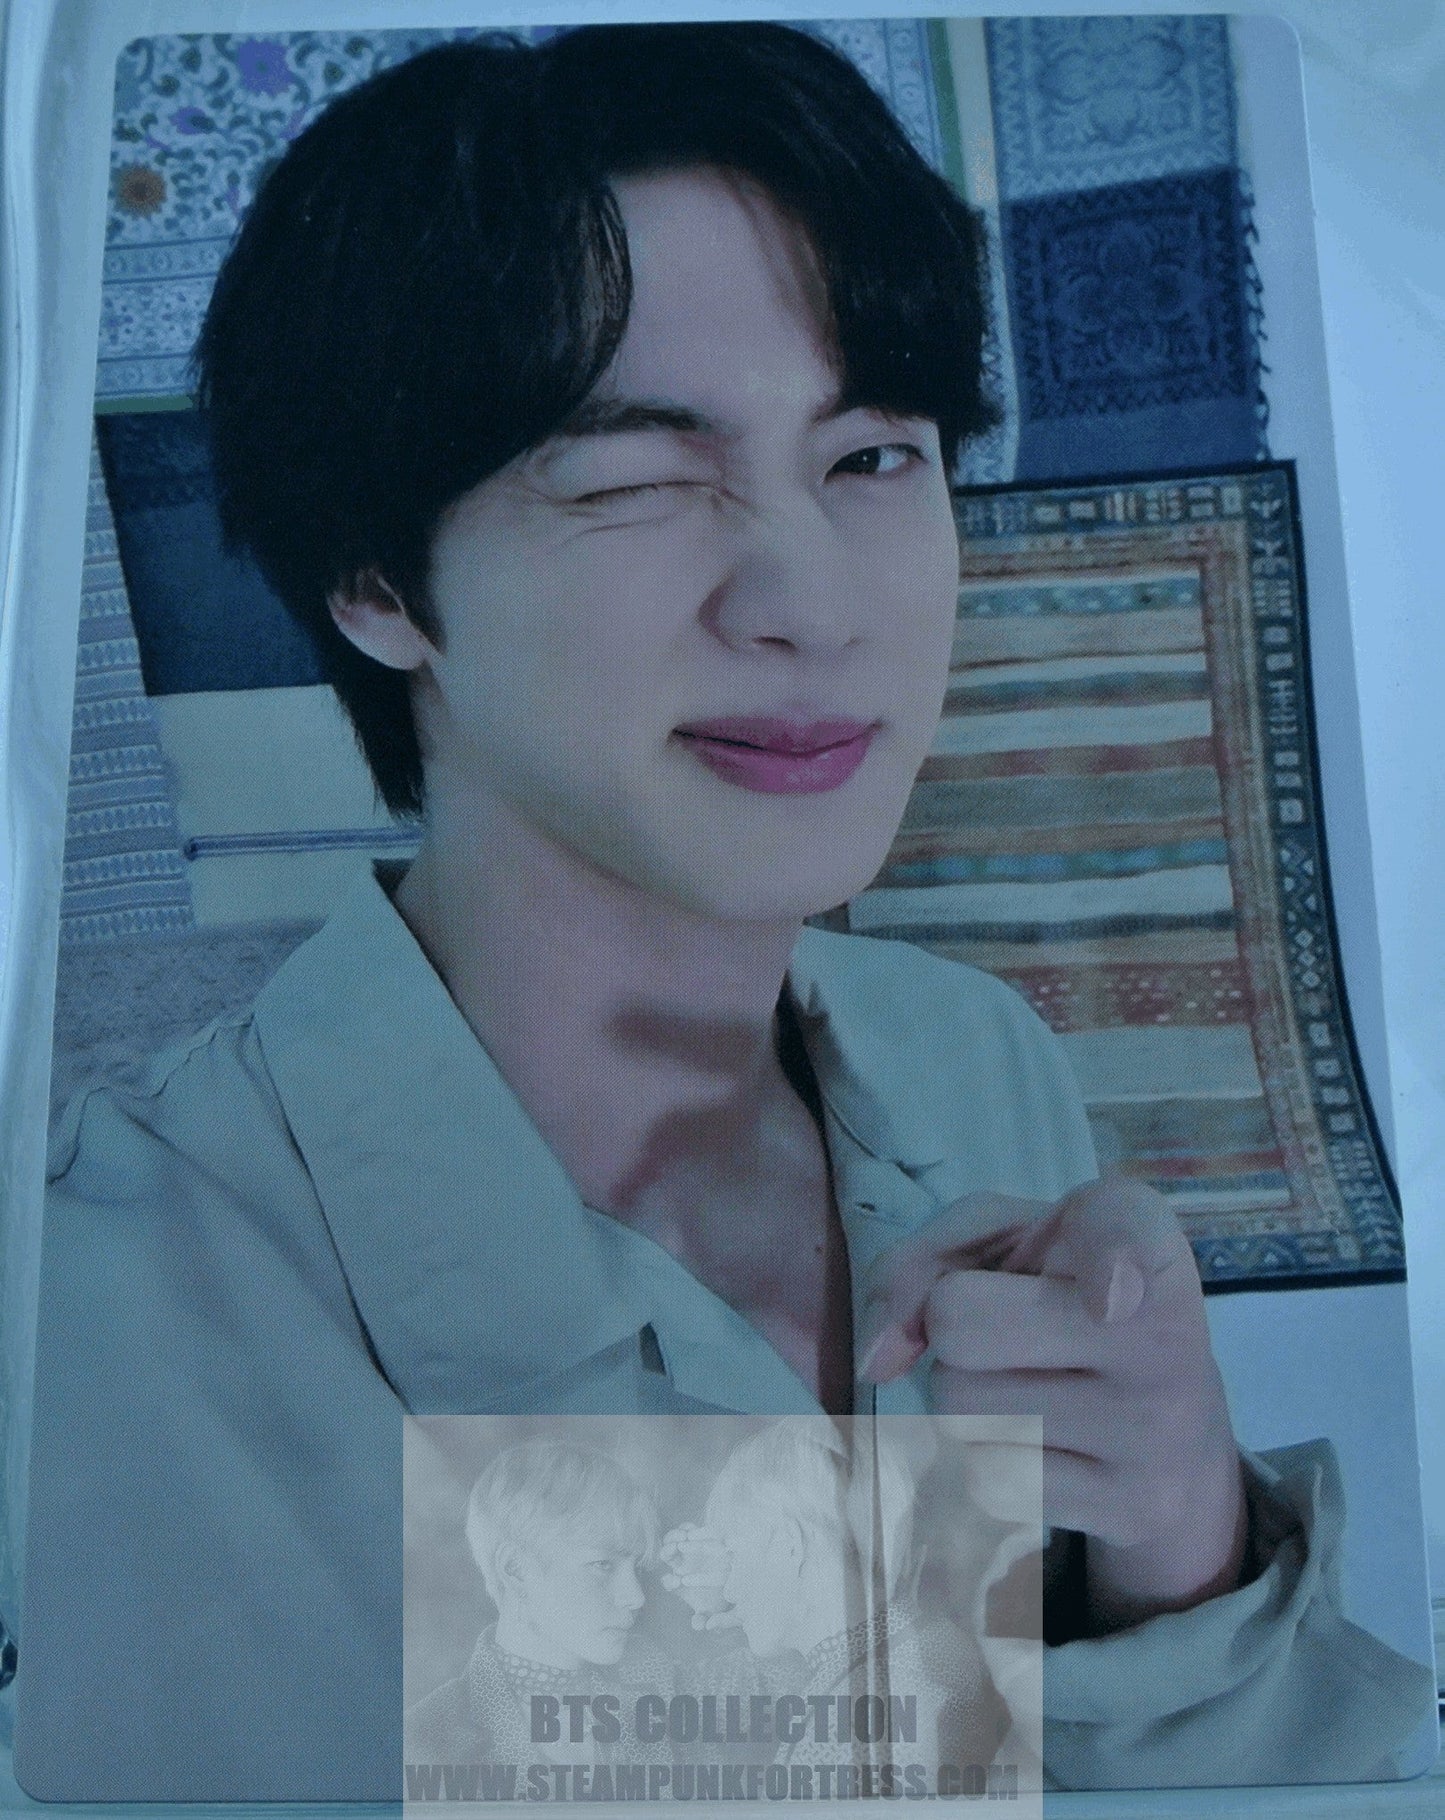 BTS JIN KIM SEOKJIN SEOK-JIN 2022 PERMISSION TO DANCE ON STAGE SEOUL PTD SPECIAL HOLOGRAM LIMITED EDITION PHOTOCARD PHOTO CARD NEW OFFICIAL MERCHANDISE